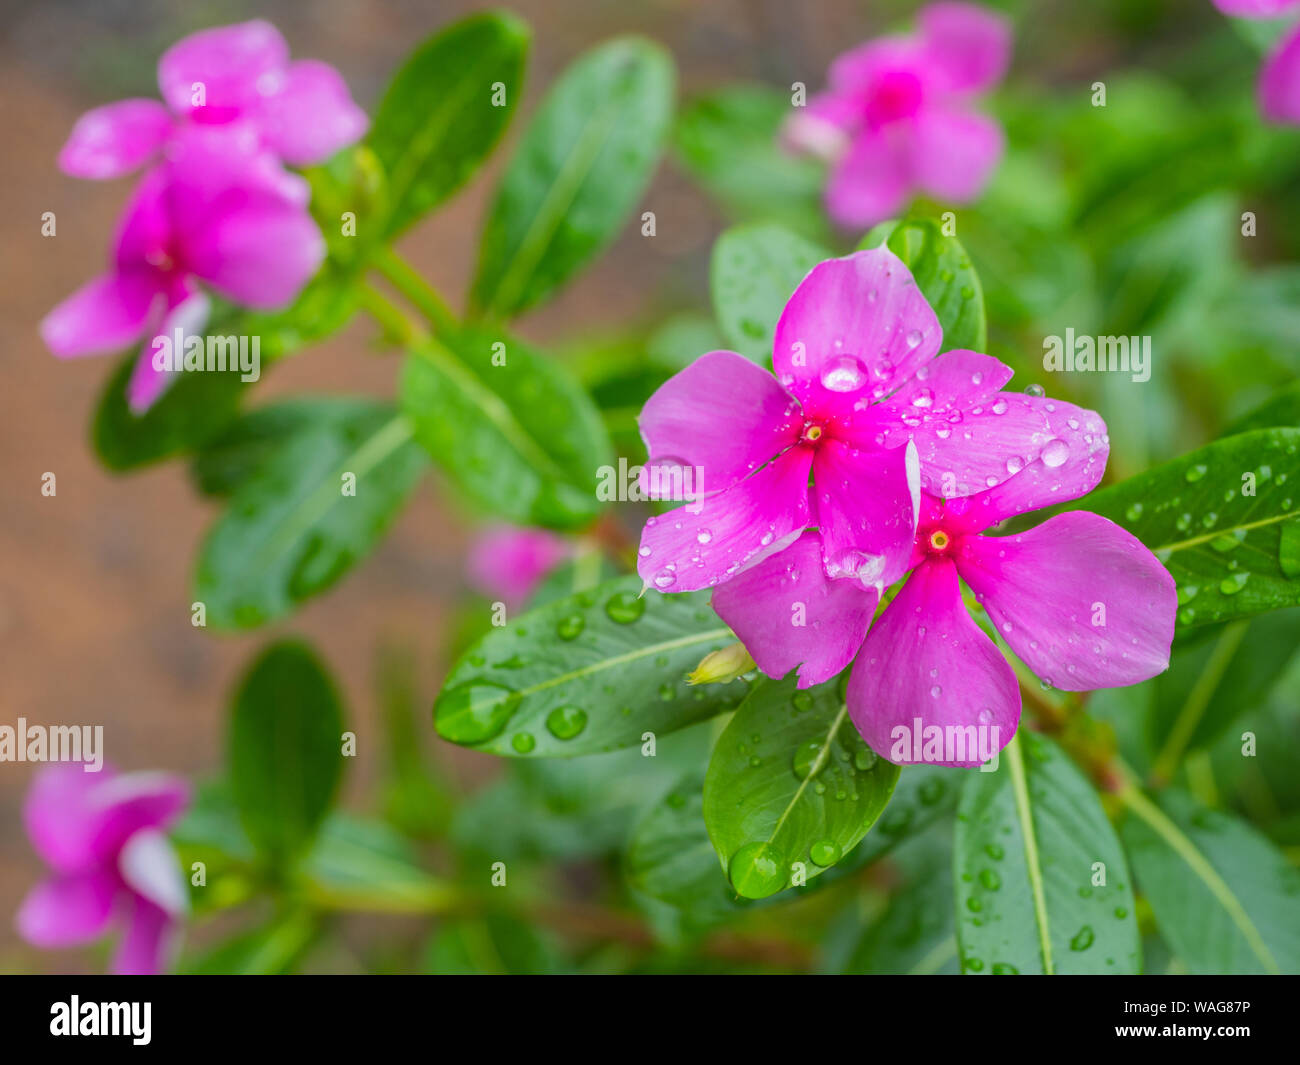 catharanthus roseus flowers with green leaf on blur Backgrounds.Noyantara, a plant, known for its reddish pink rose petal flowers.Cape periwinkle, Mad Stock Photo